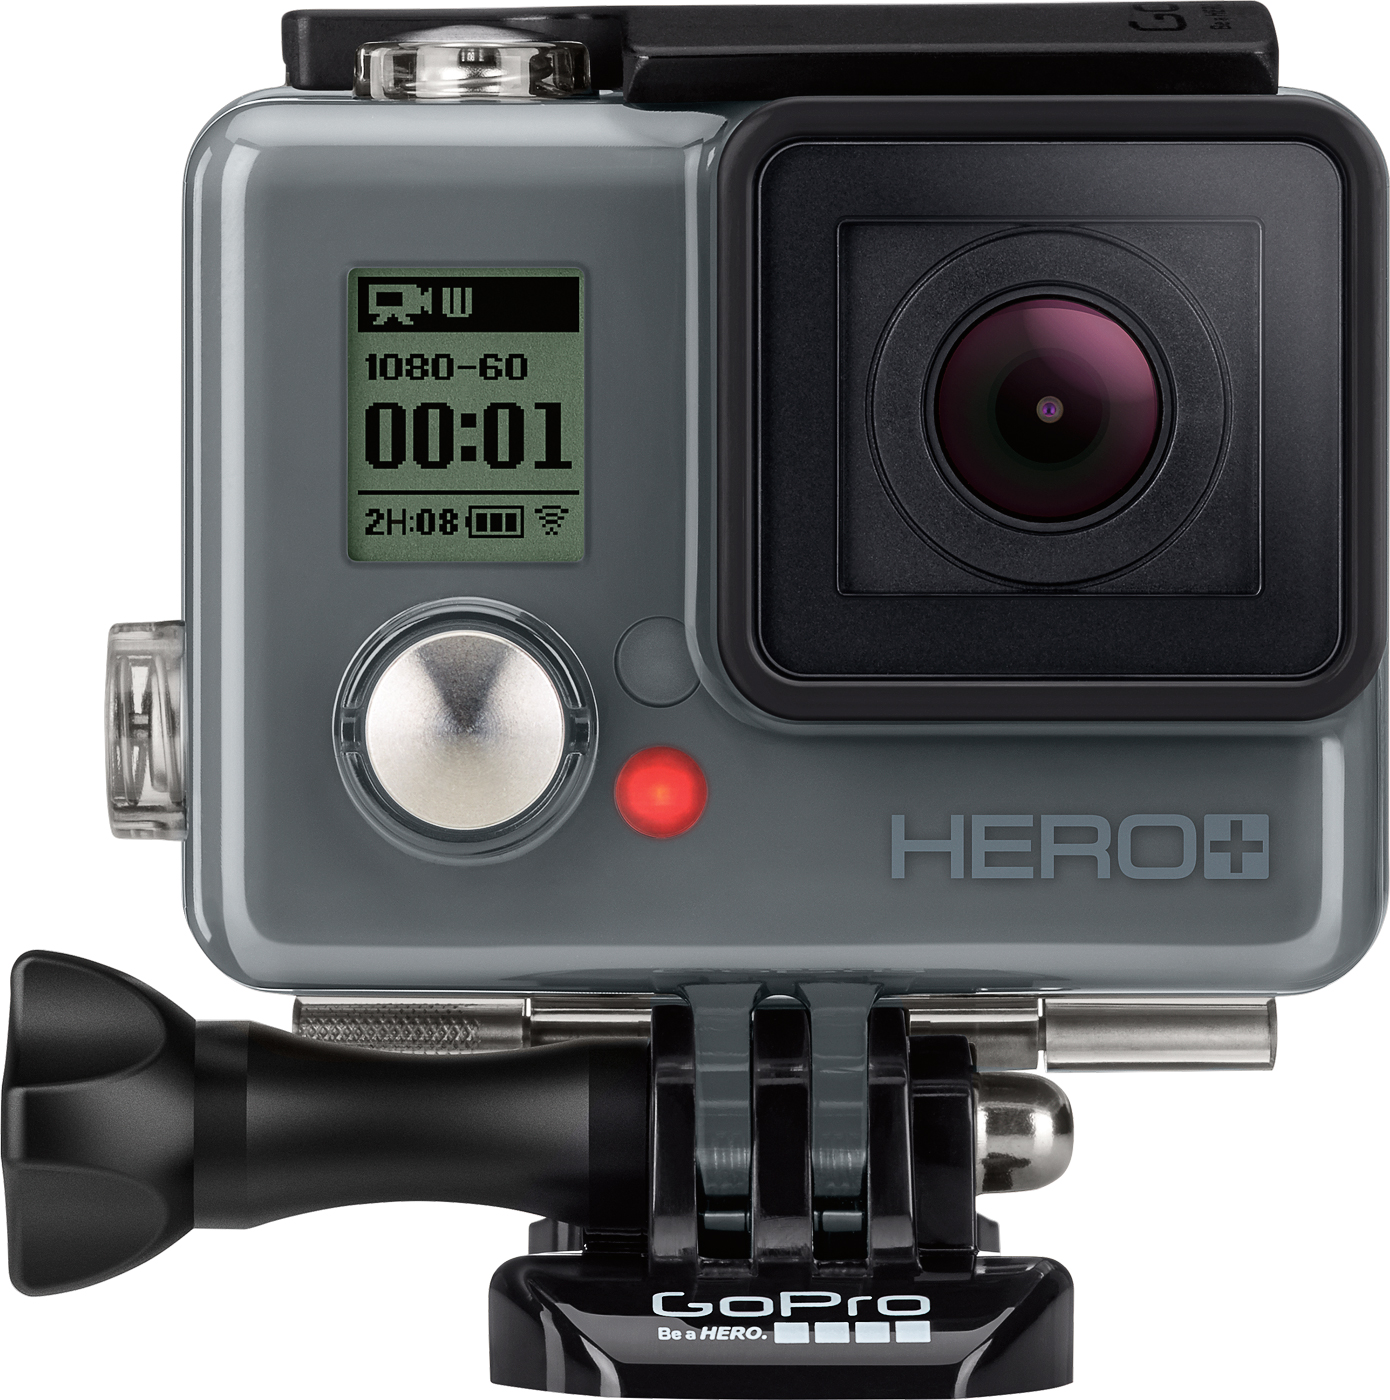 Get the new GoPro HERO+ for Father’s Day